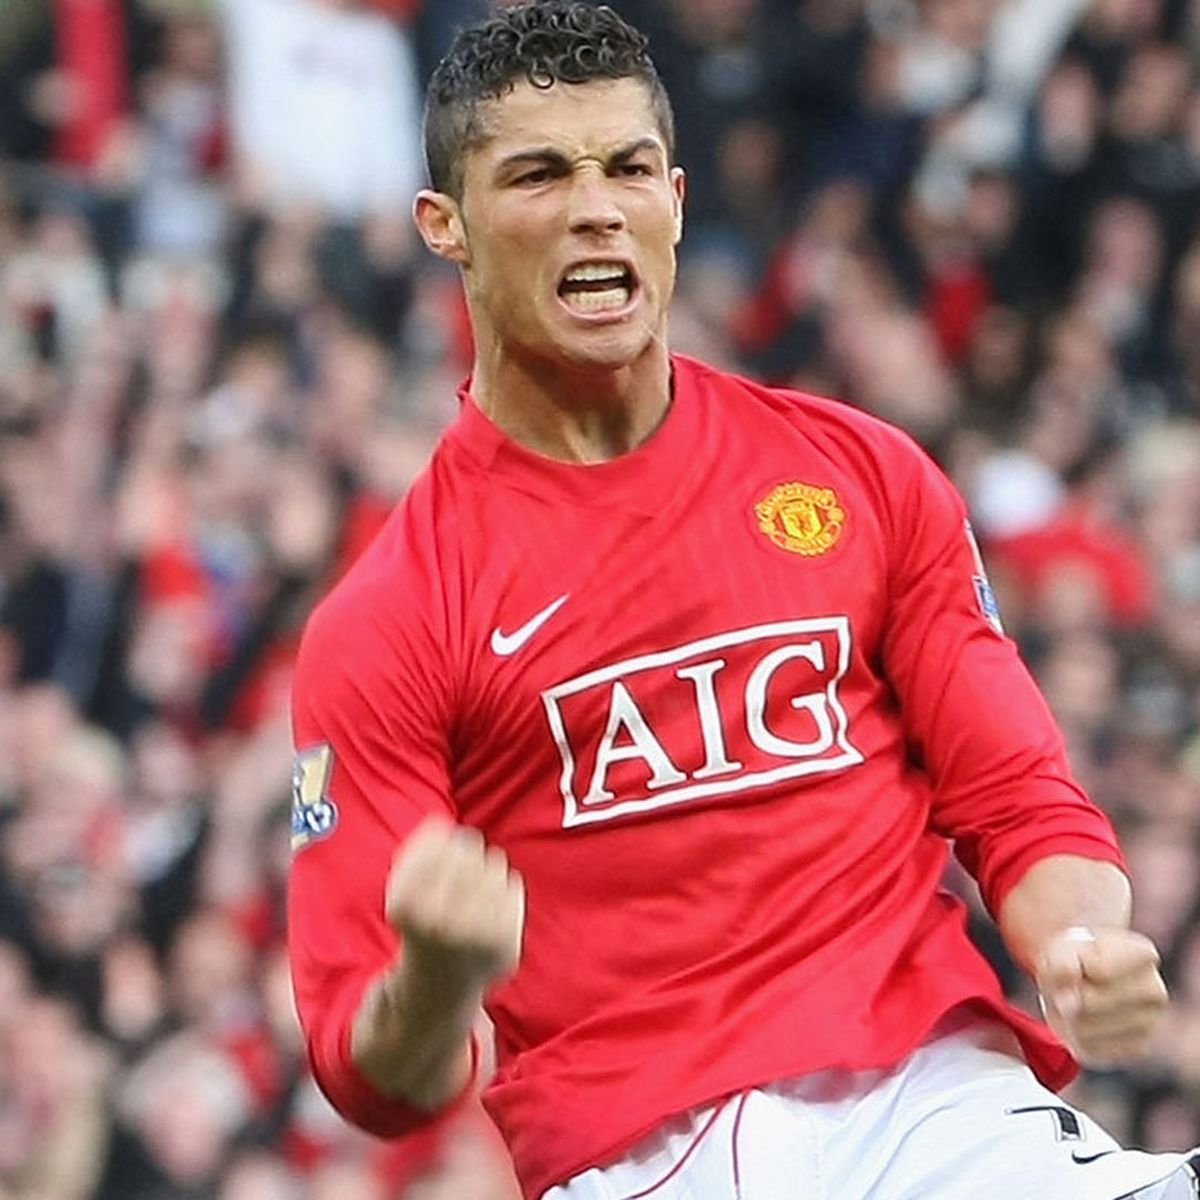 Cristiano Ronaldo of Manchester United in action during the Barclays